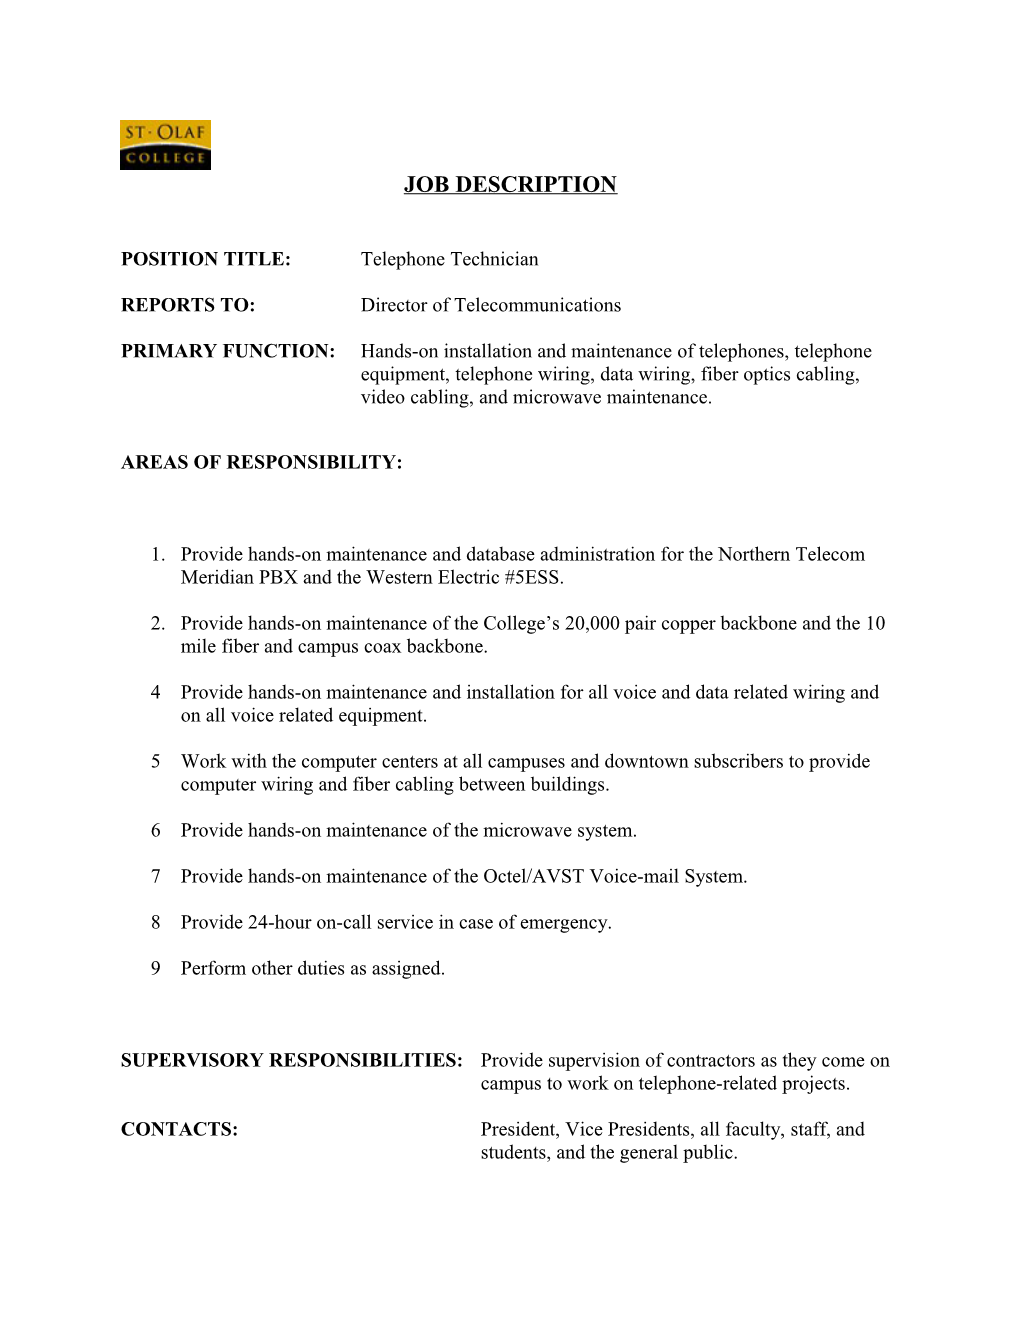 Instructions For Writing The Job Description